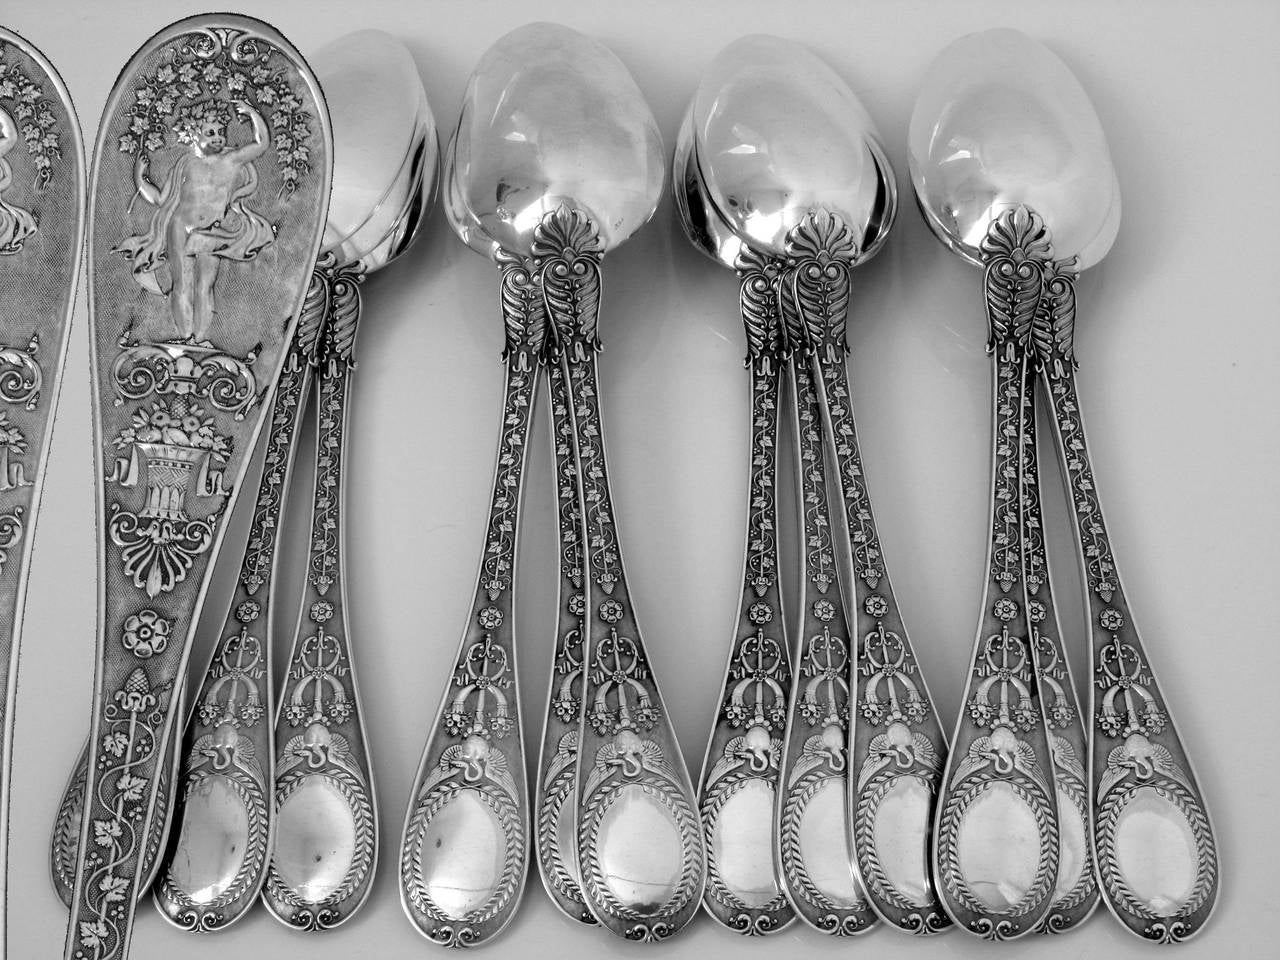 Queille Masterpiece French Sterling Silver Dinner Flatware 36 pc Swan, Putti 4